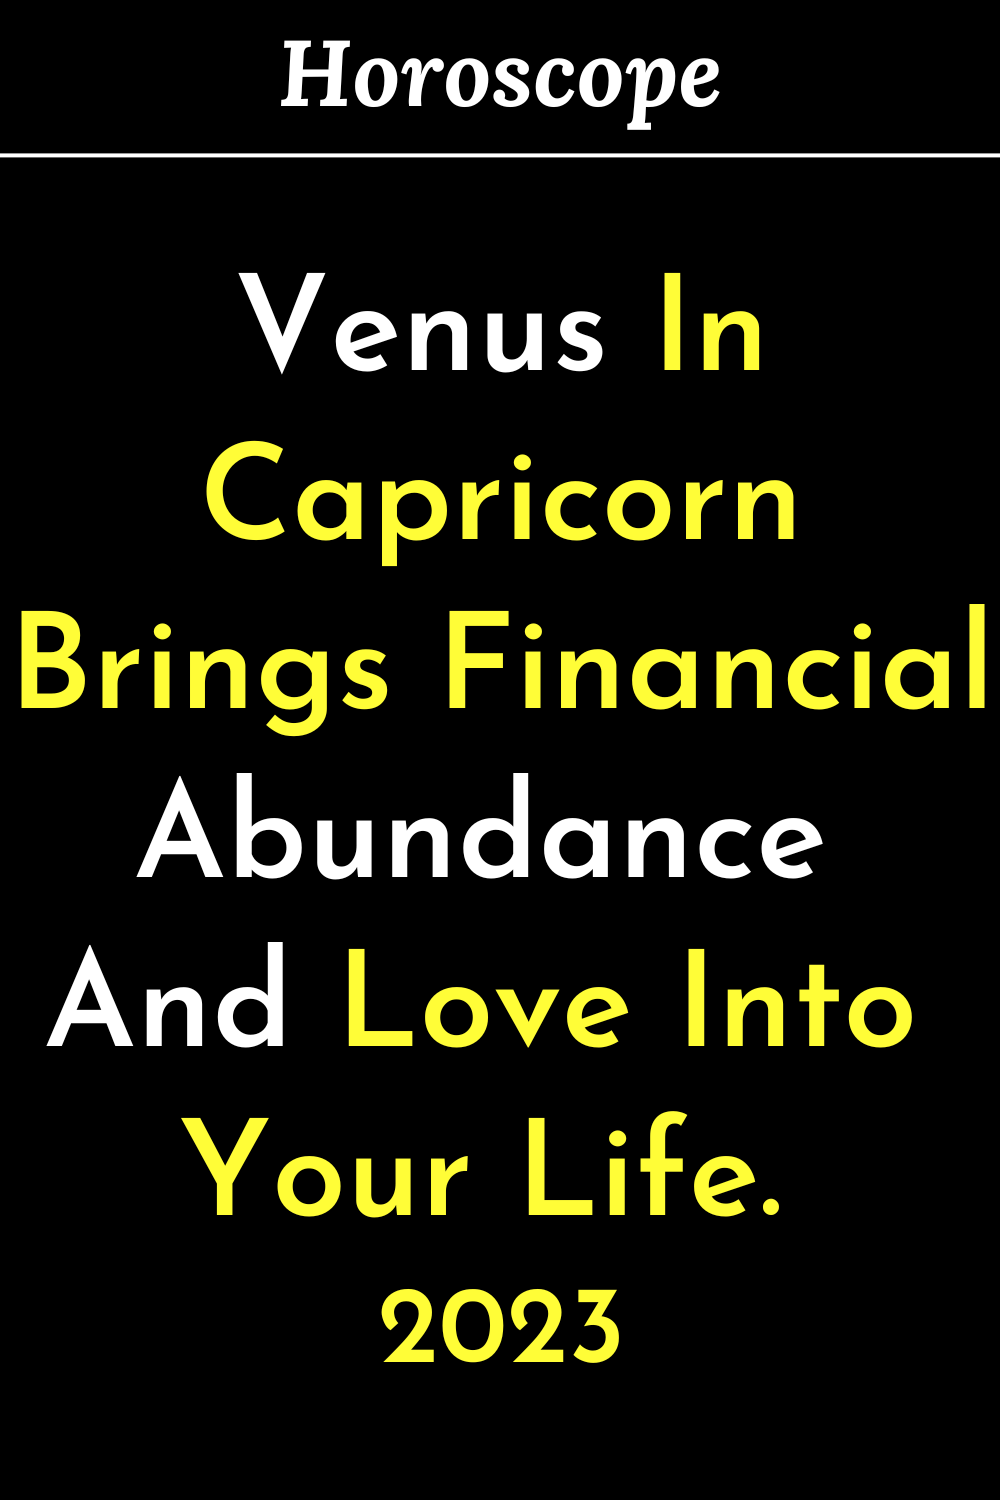 Venus In Capricorn Brings Financial Abundance And Love Into Your Life. You Will Feel Its Influence Until January 2, 2023